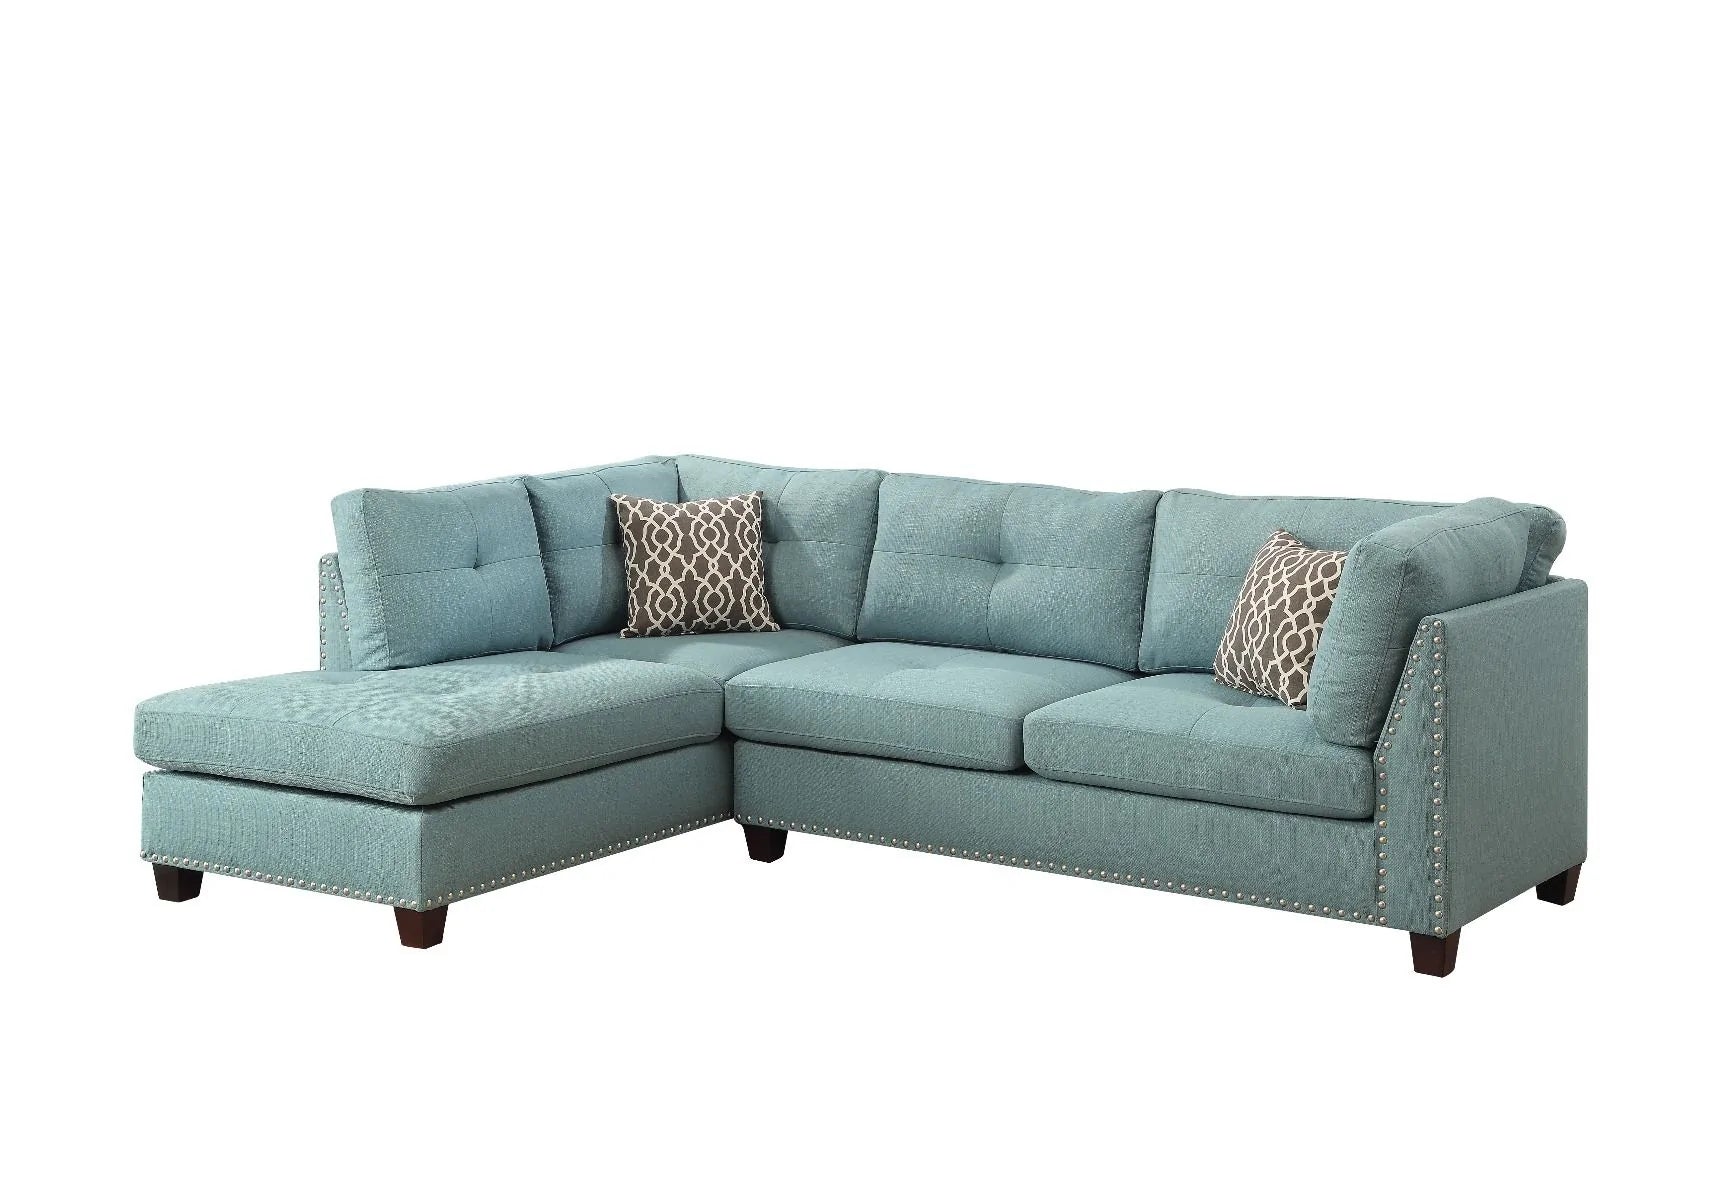 Laurissa Light Teal Linen Sectional Sofa Model 54390 By ACME Furniture